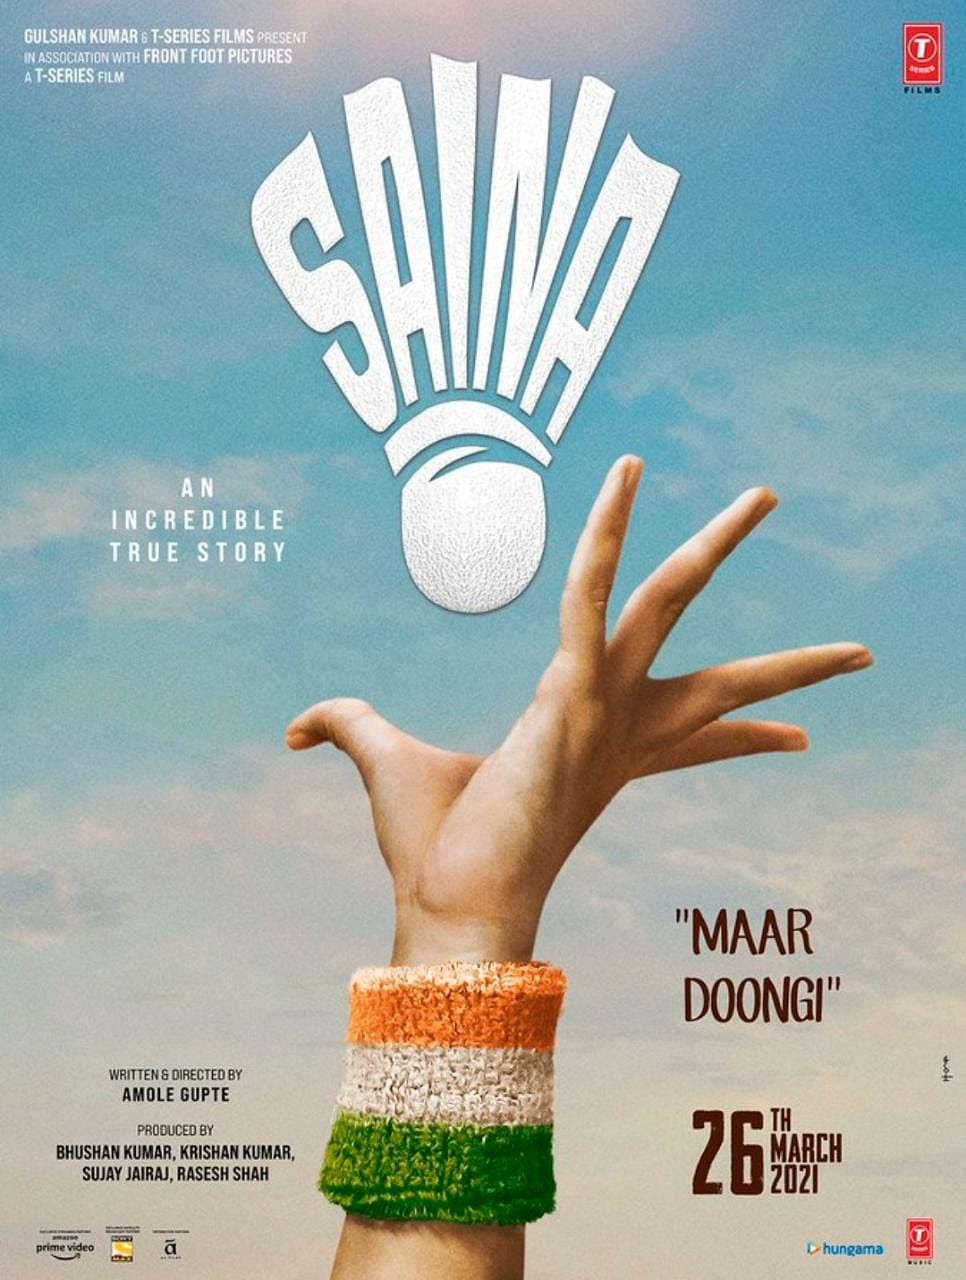 The film tells the story of ace Indian shuttler Saina Nehwal.